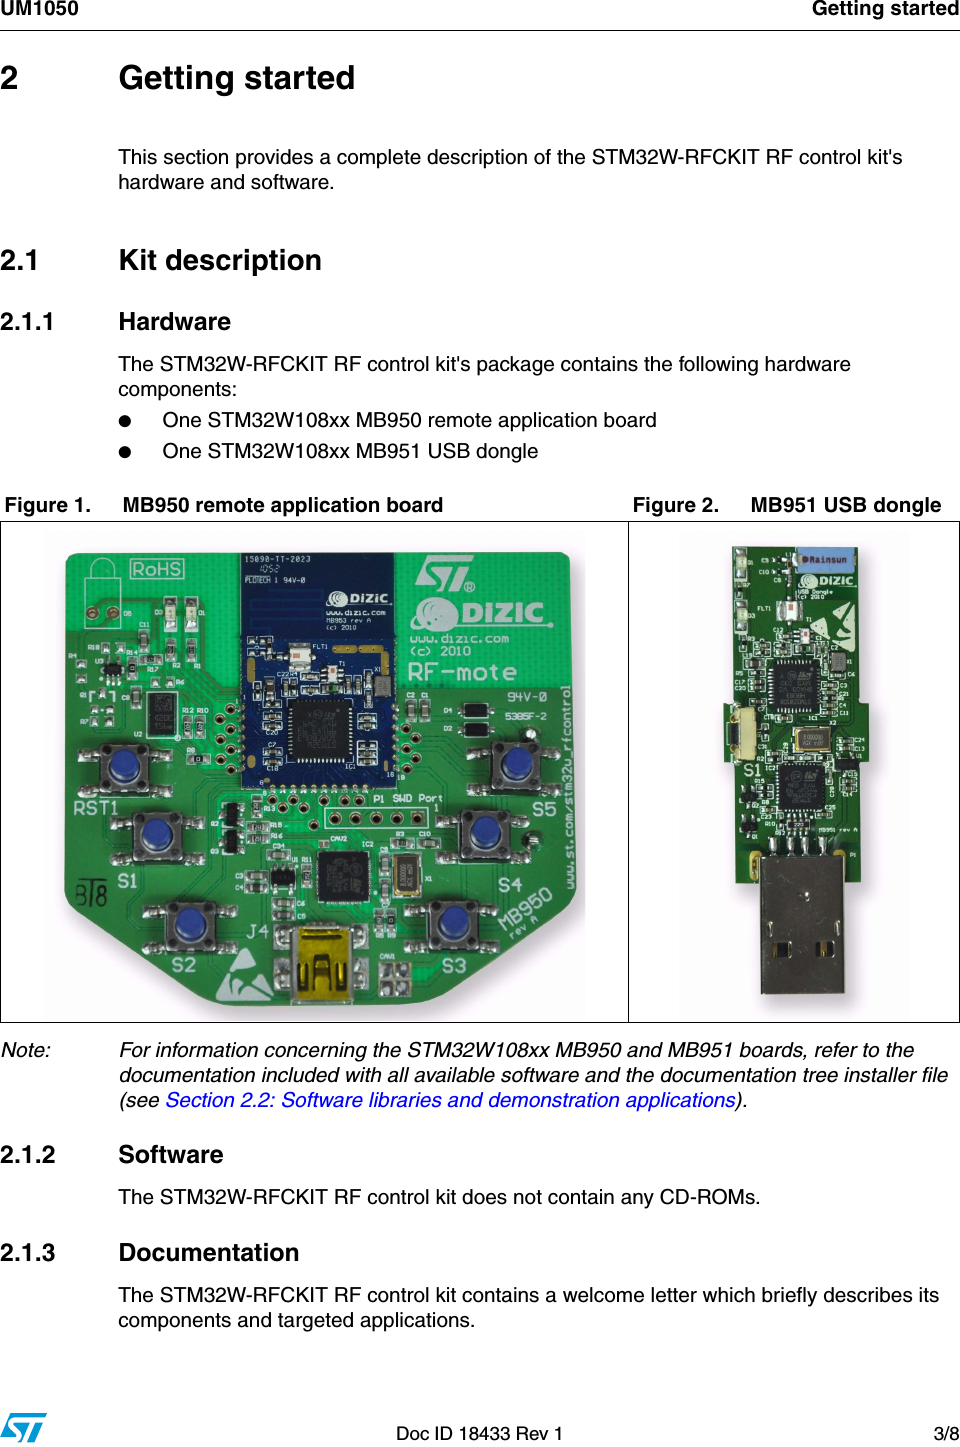 UM1050 Getting startedDoc ID 18433 Rev 1 3/82 Getting startedThis section provides a complete description of the STM32W-RFCKIT RF control kit&apos;s hardware and software.2.1 Kit description2.1.1 HardwareThe STM32W-RFCKIT RF control kit&apos;s package contains the following hardware components:●One STM32W108xx MB950 remote application board●One STM32W108xx MB951 USB dongle         Note: For information concerning the STM32W108xx MB950 and MB951 boards, refer to the documentation included with all available software and the documentation tree installer file (see Section 2.2: Software libraries and demonstration applications). 2.1.2 SoftwareThe STM32W-RFCKIT RF control kit does not contain any CD-ROMs.2.1.3 DocumentationThe STM32W-RFCKIT RF control kit contains a welcome letter which briefly describes its components and targeted applications.Figure 1. MB950 remote application board Figure 2. MB951 USB dongle                   